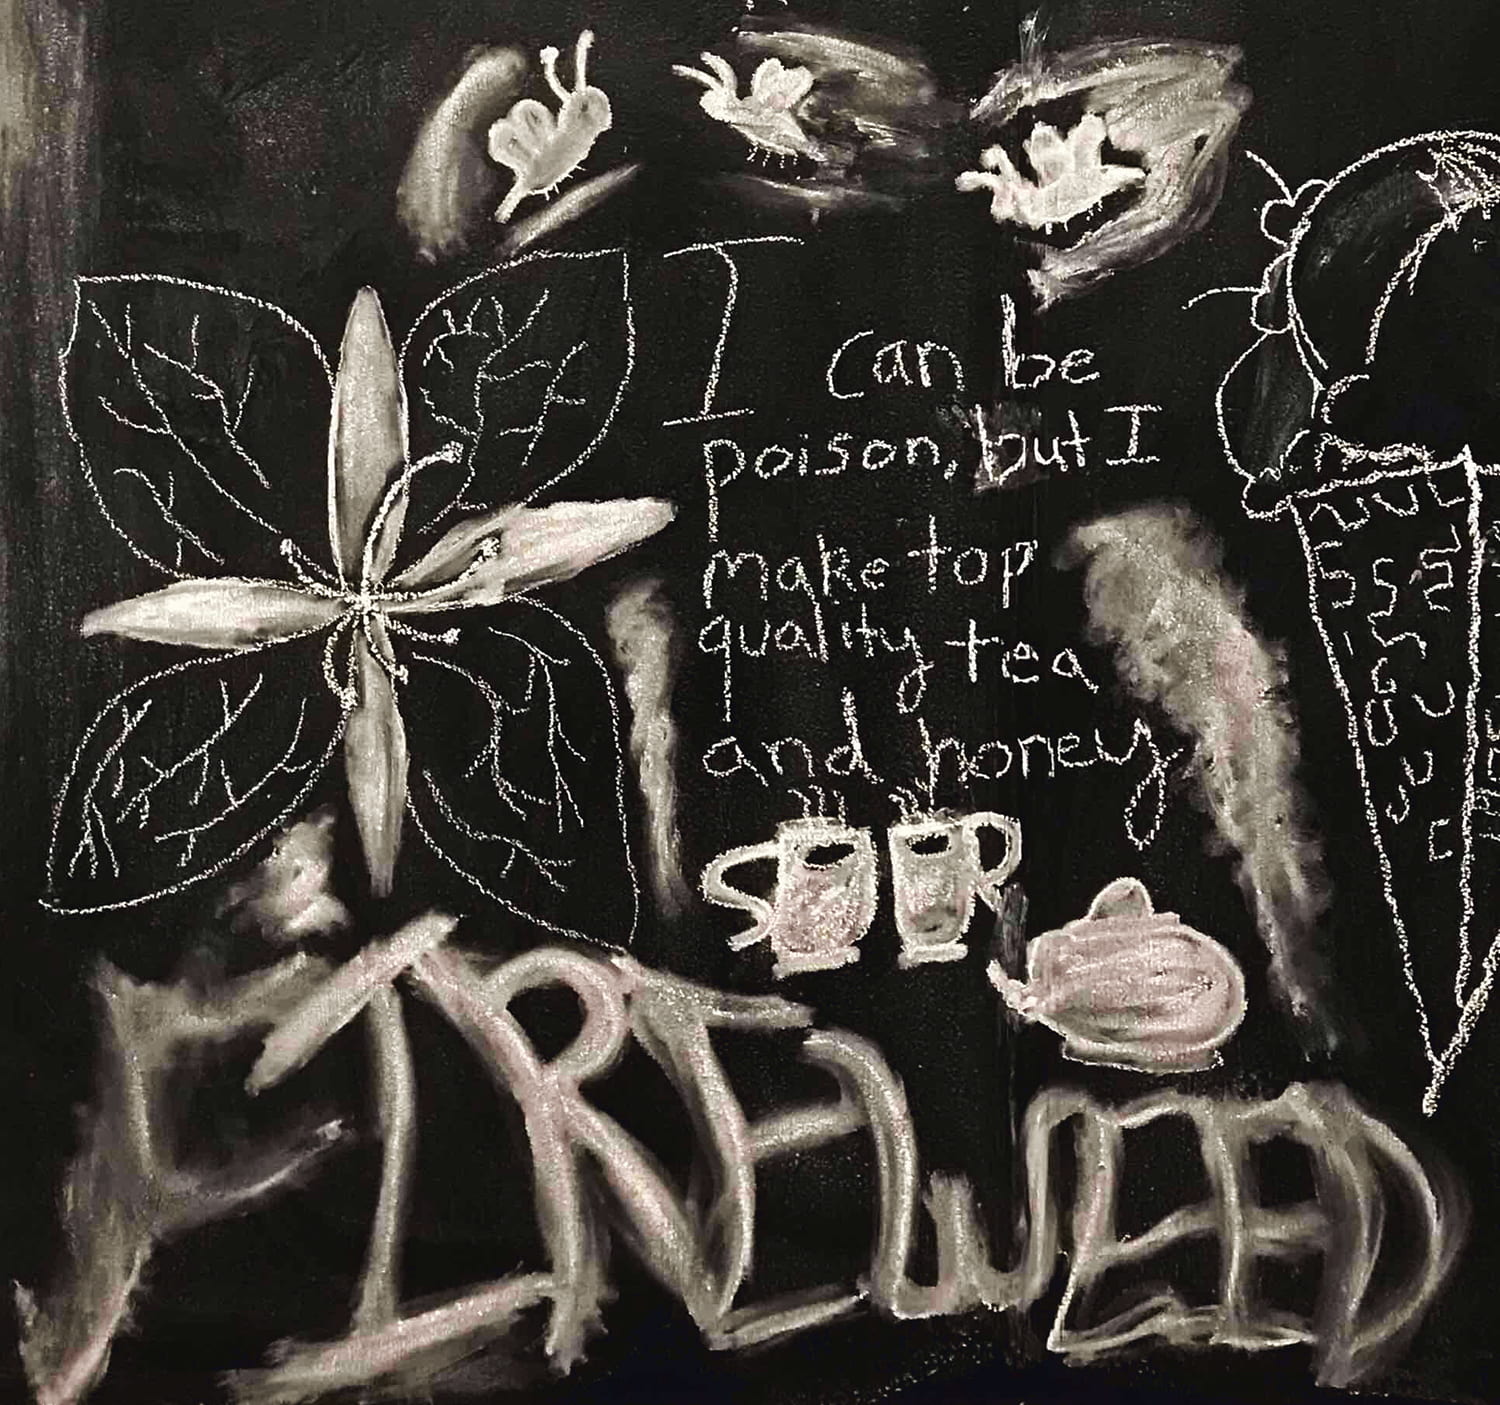 winged bugs, flowers, teacups and teapot, and the words "I can be poison, but I make top quality tea and honey: Fireweed"